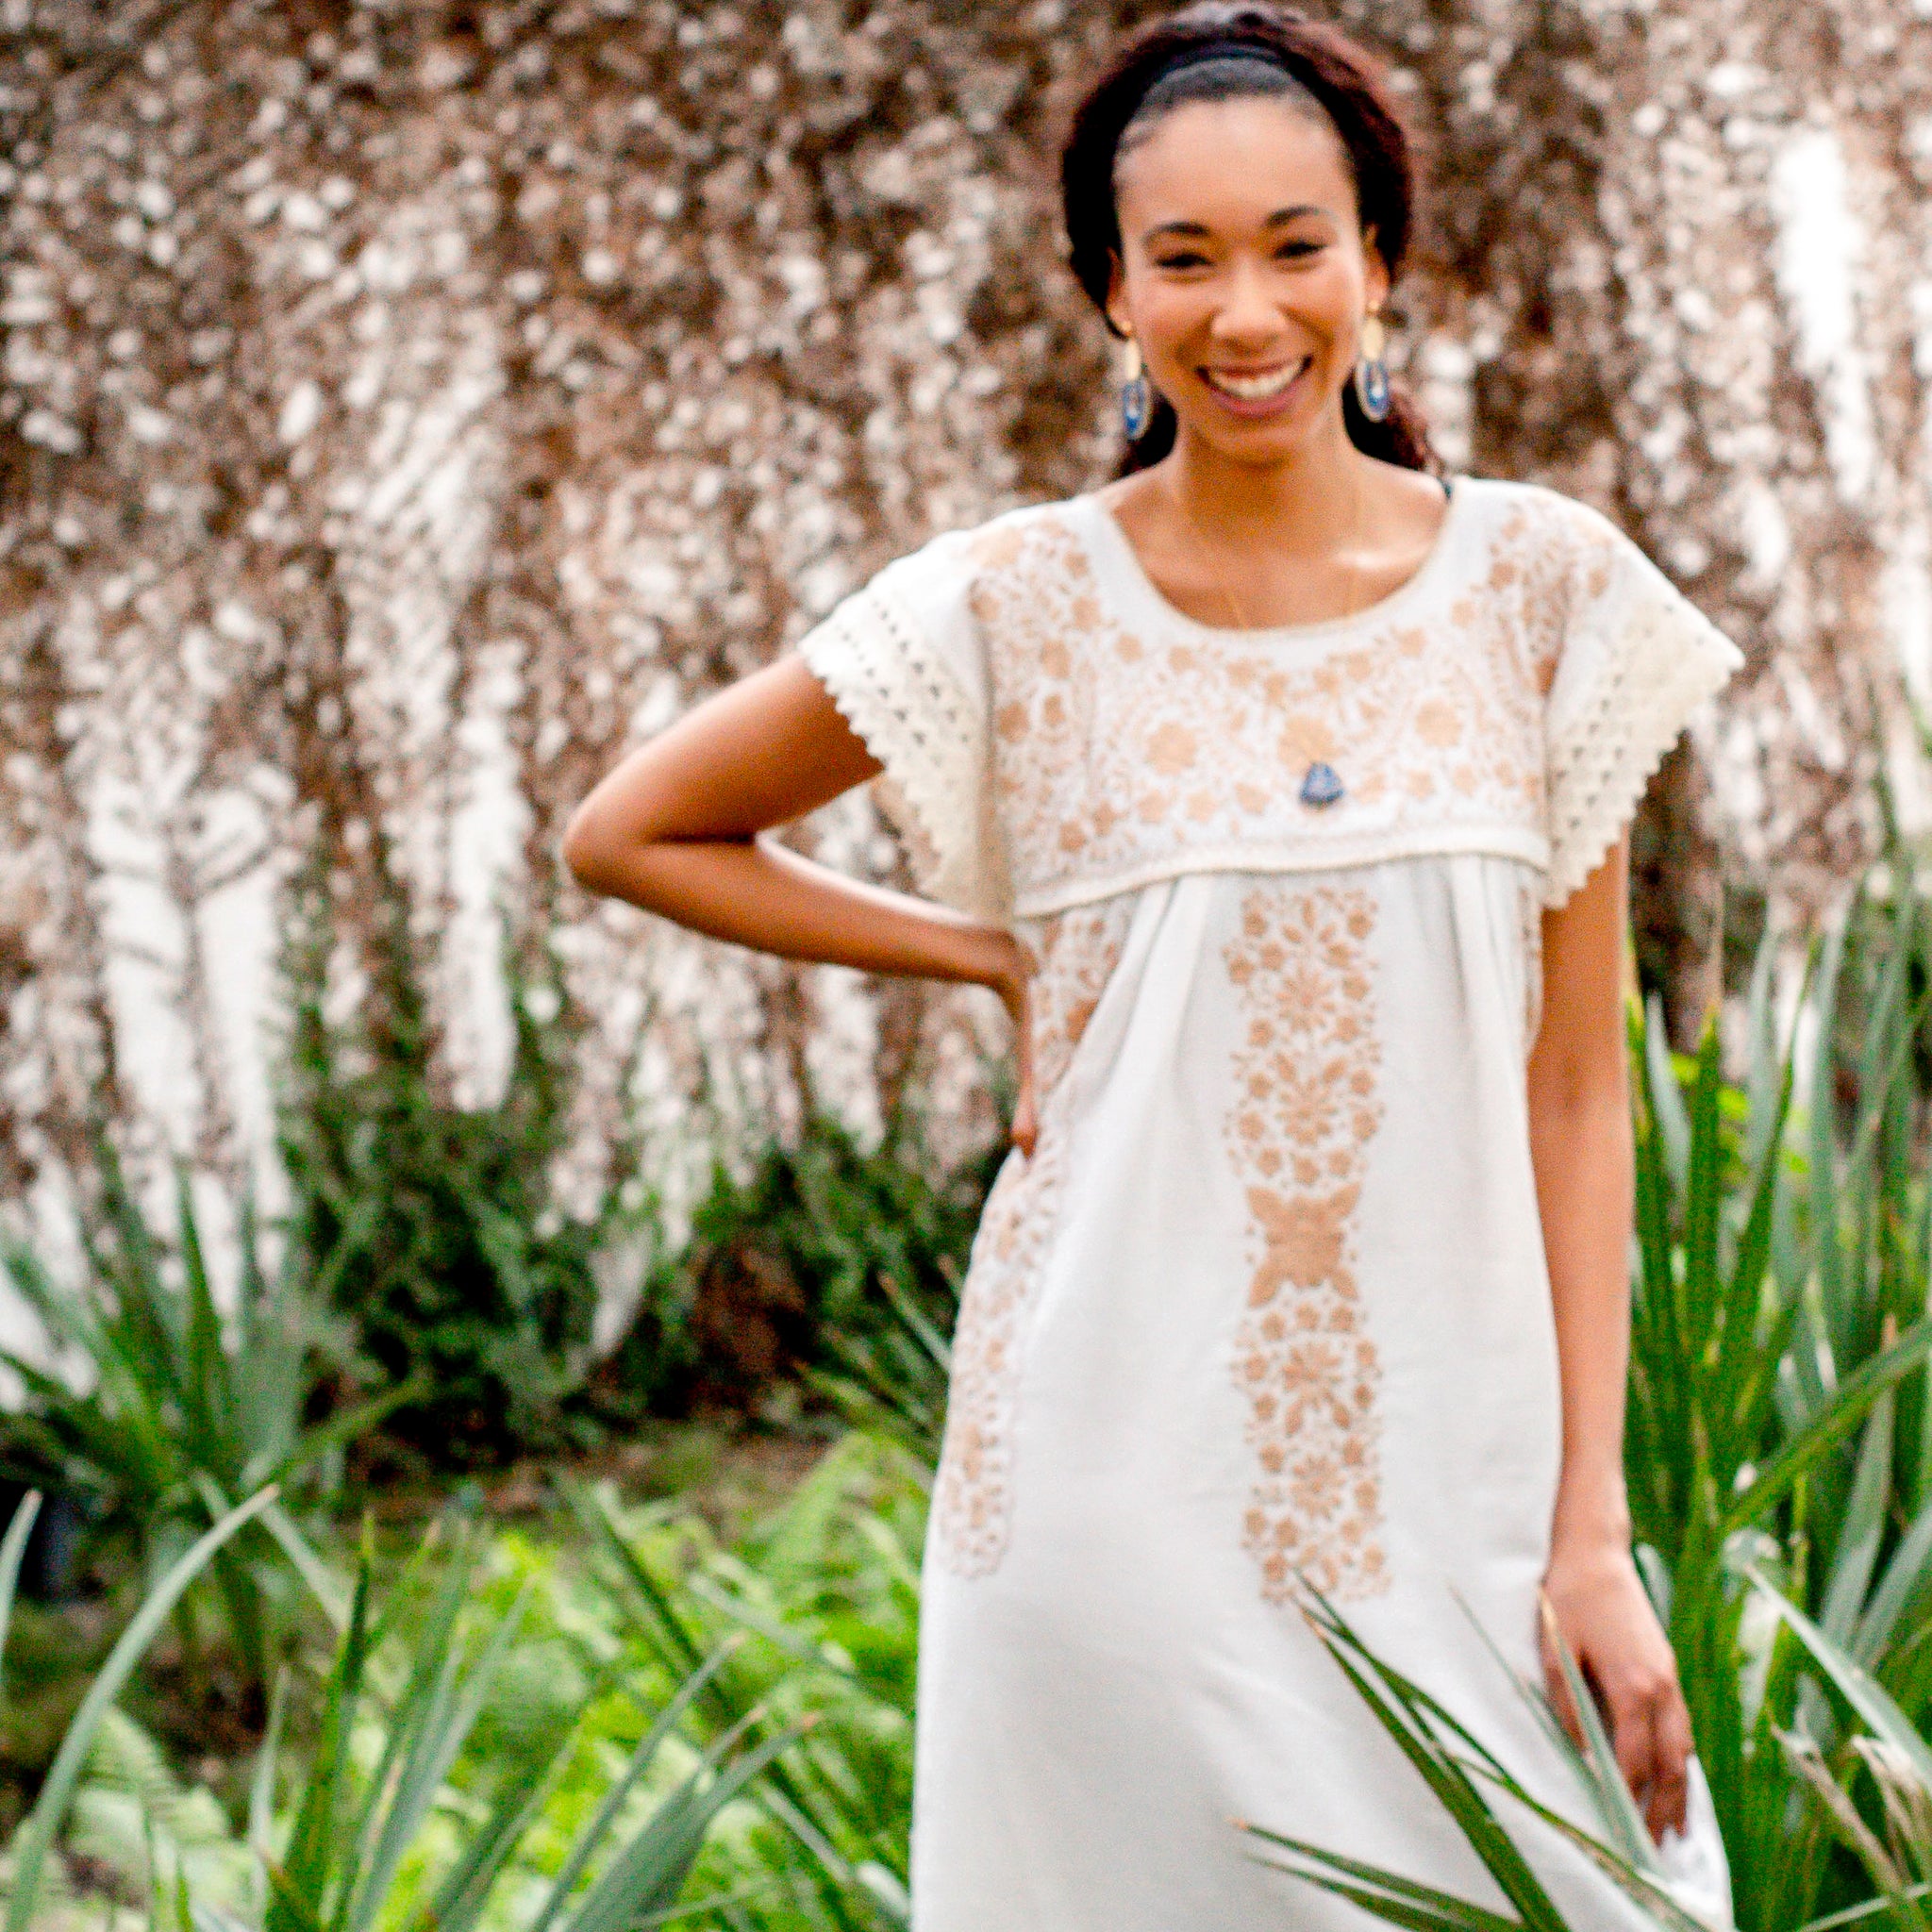 Violeta Dress - Hand Embroidered by Mexican Artisans / Beige Embroidery on Manta